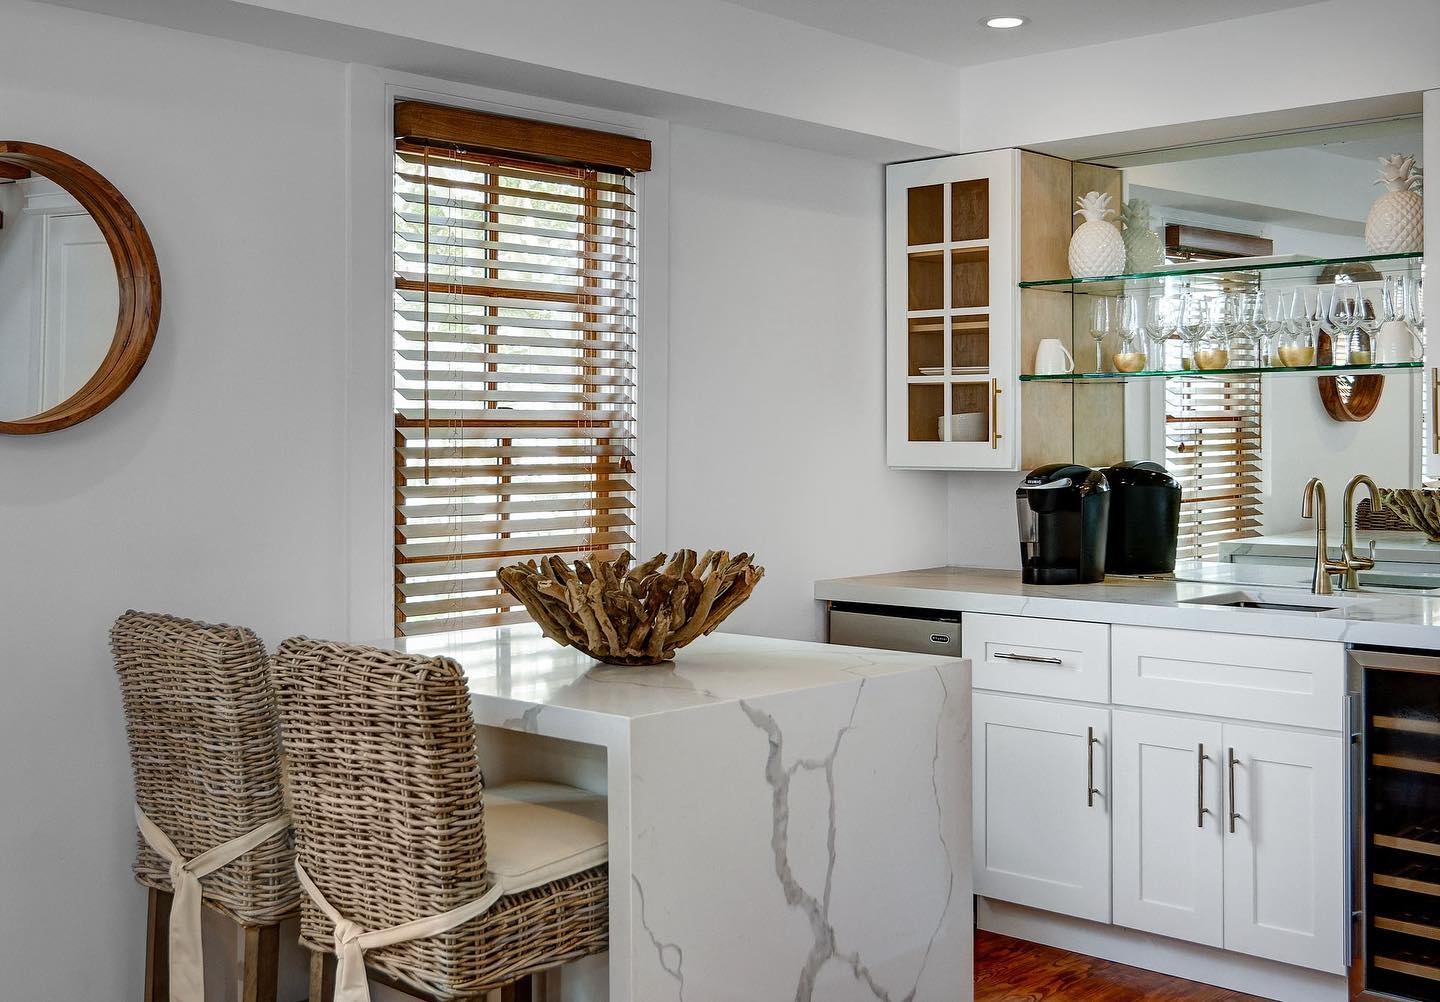 Would you take your morning coffee or afternoon cocktails in the Paradise Cottages spacious wet bar ️